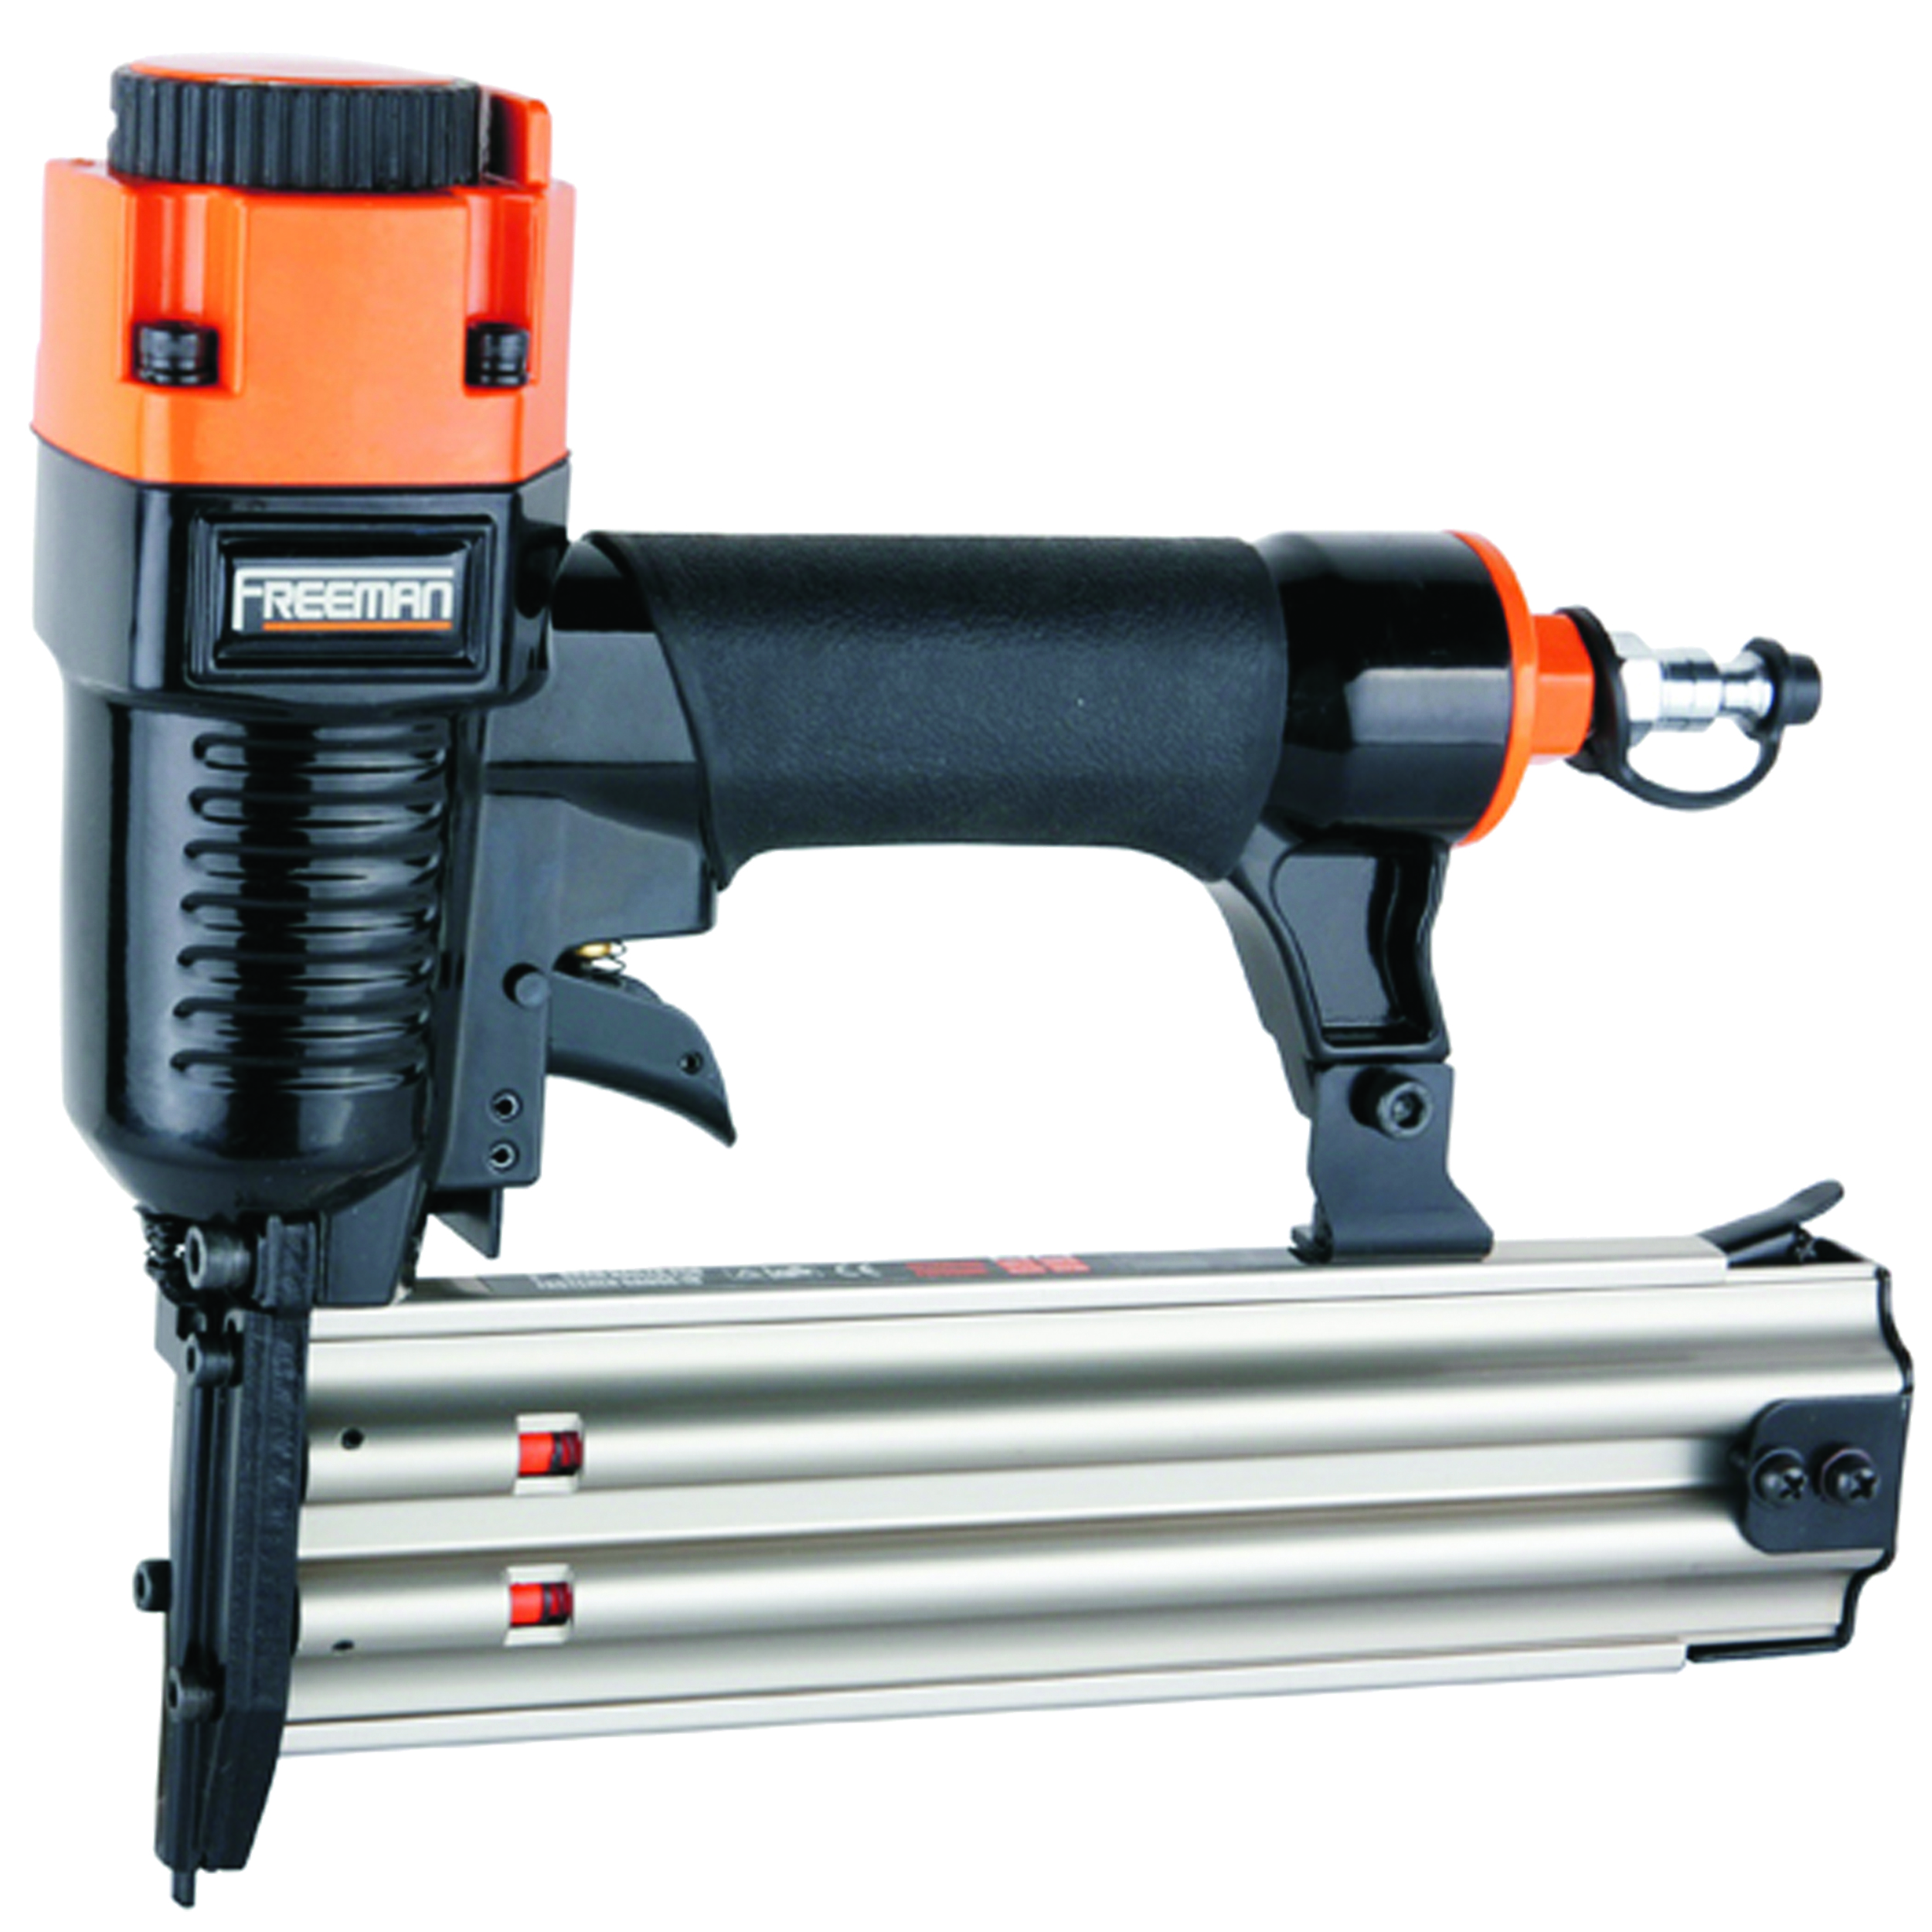 2" Brad Nailer With Quick Jam Release And Depth Adjust, Model Pbr50q